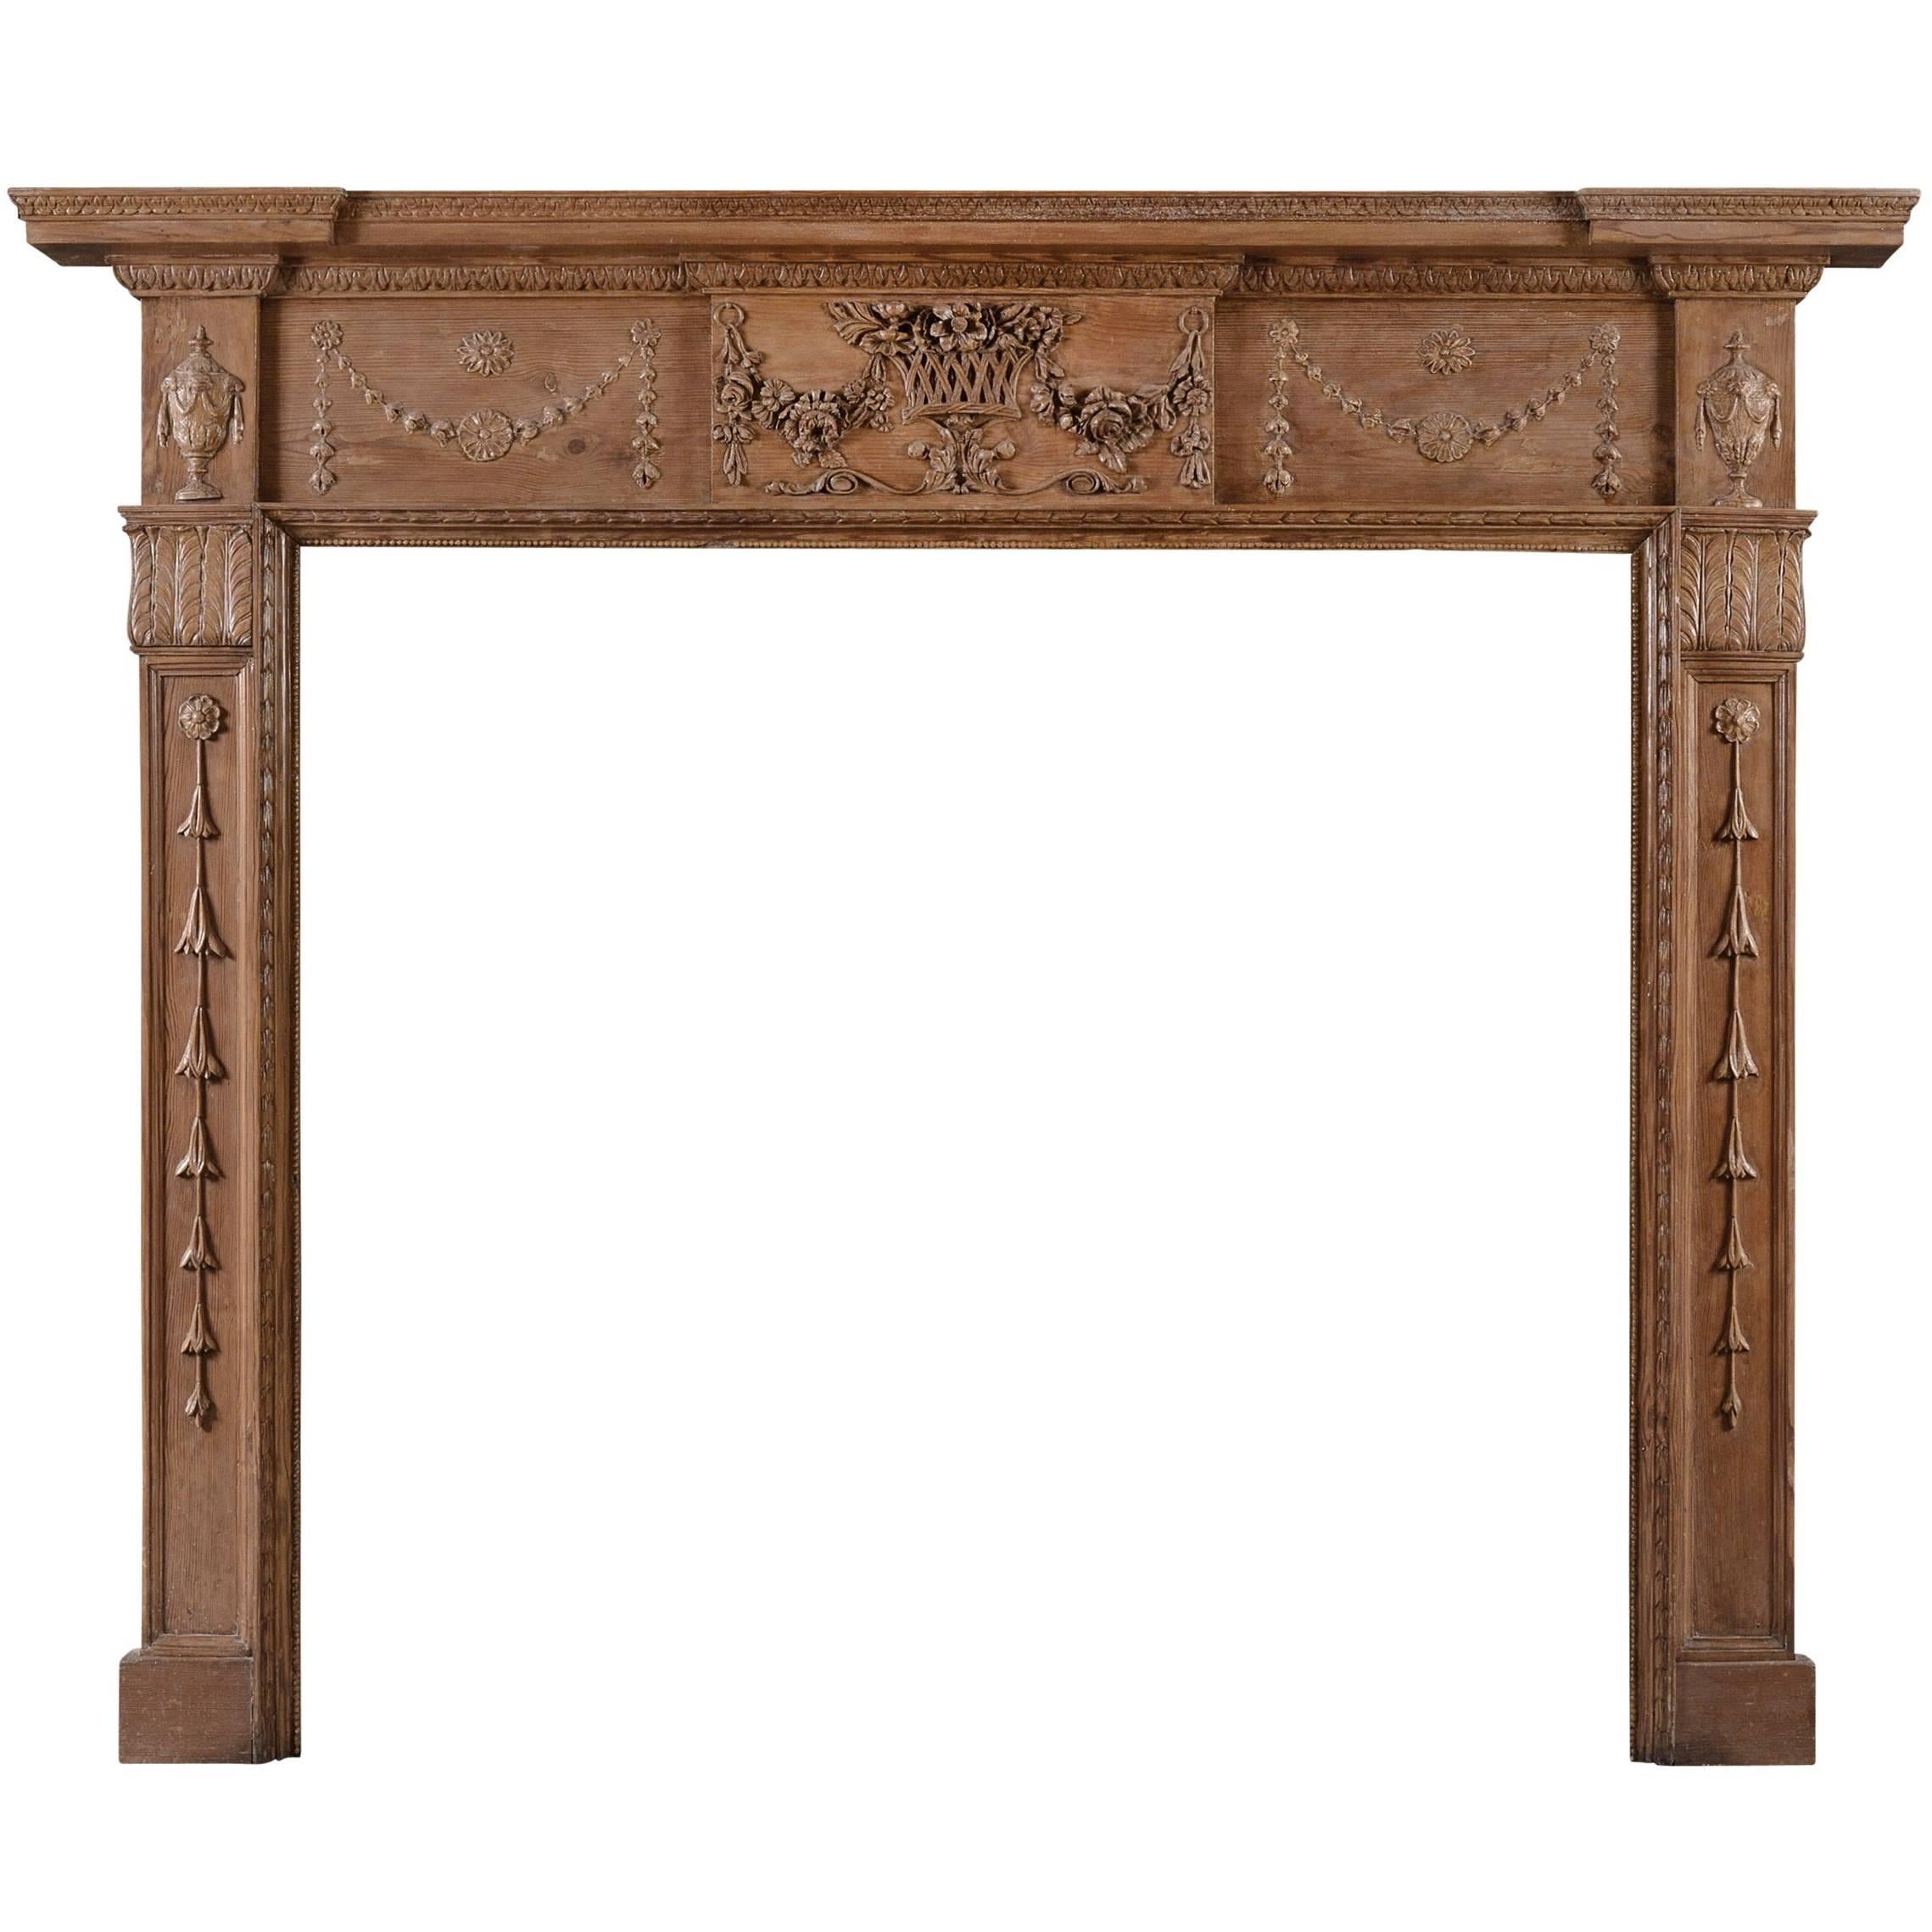 English Pine and Gesso Antique Fireplace